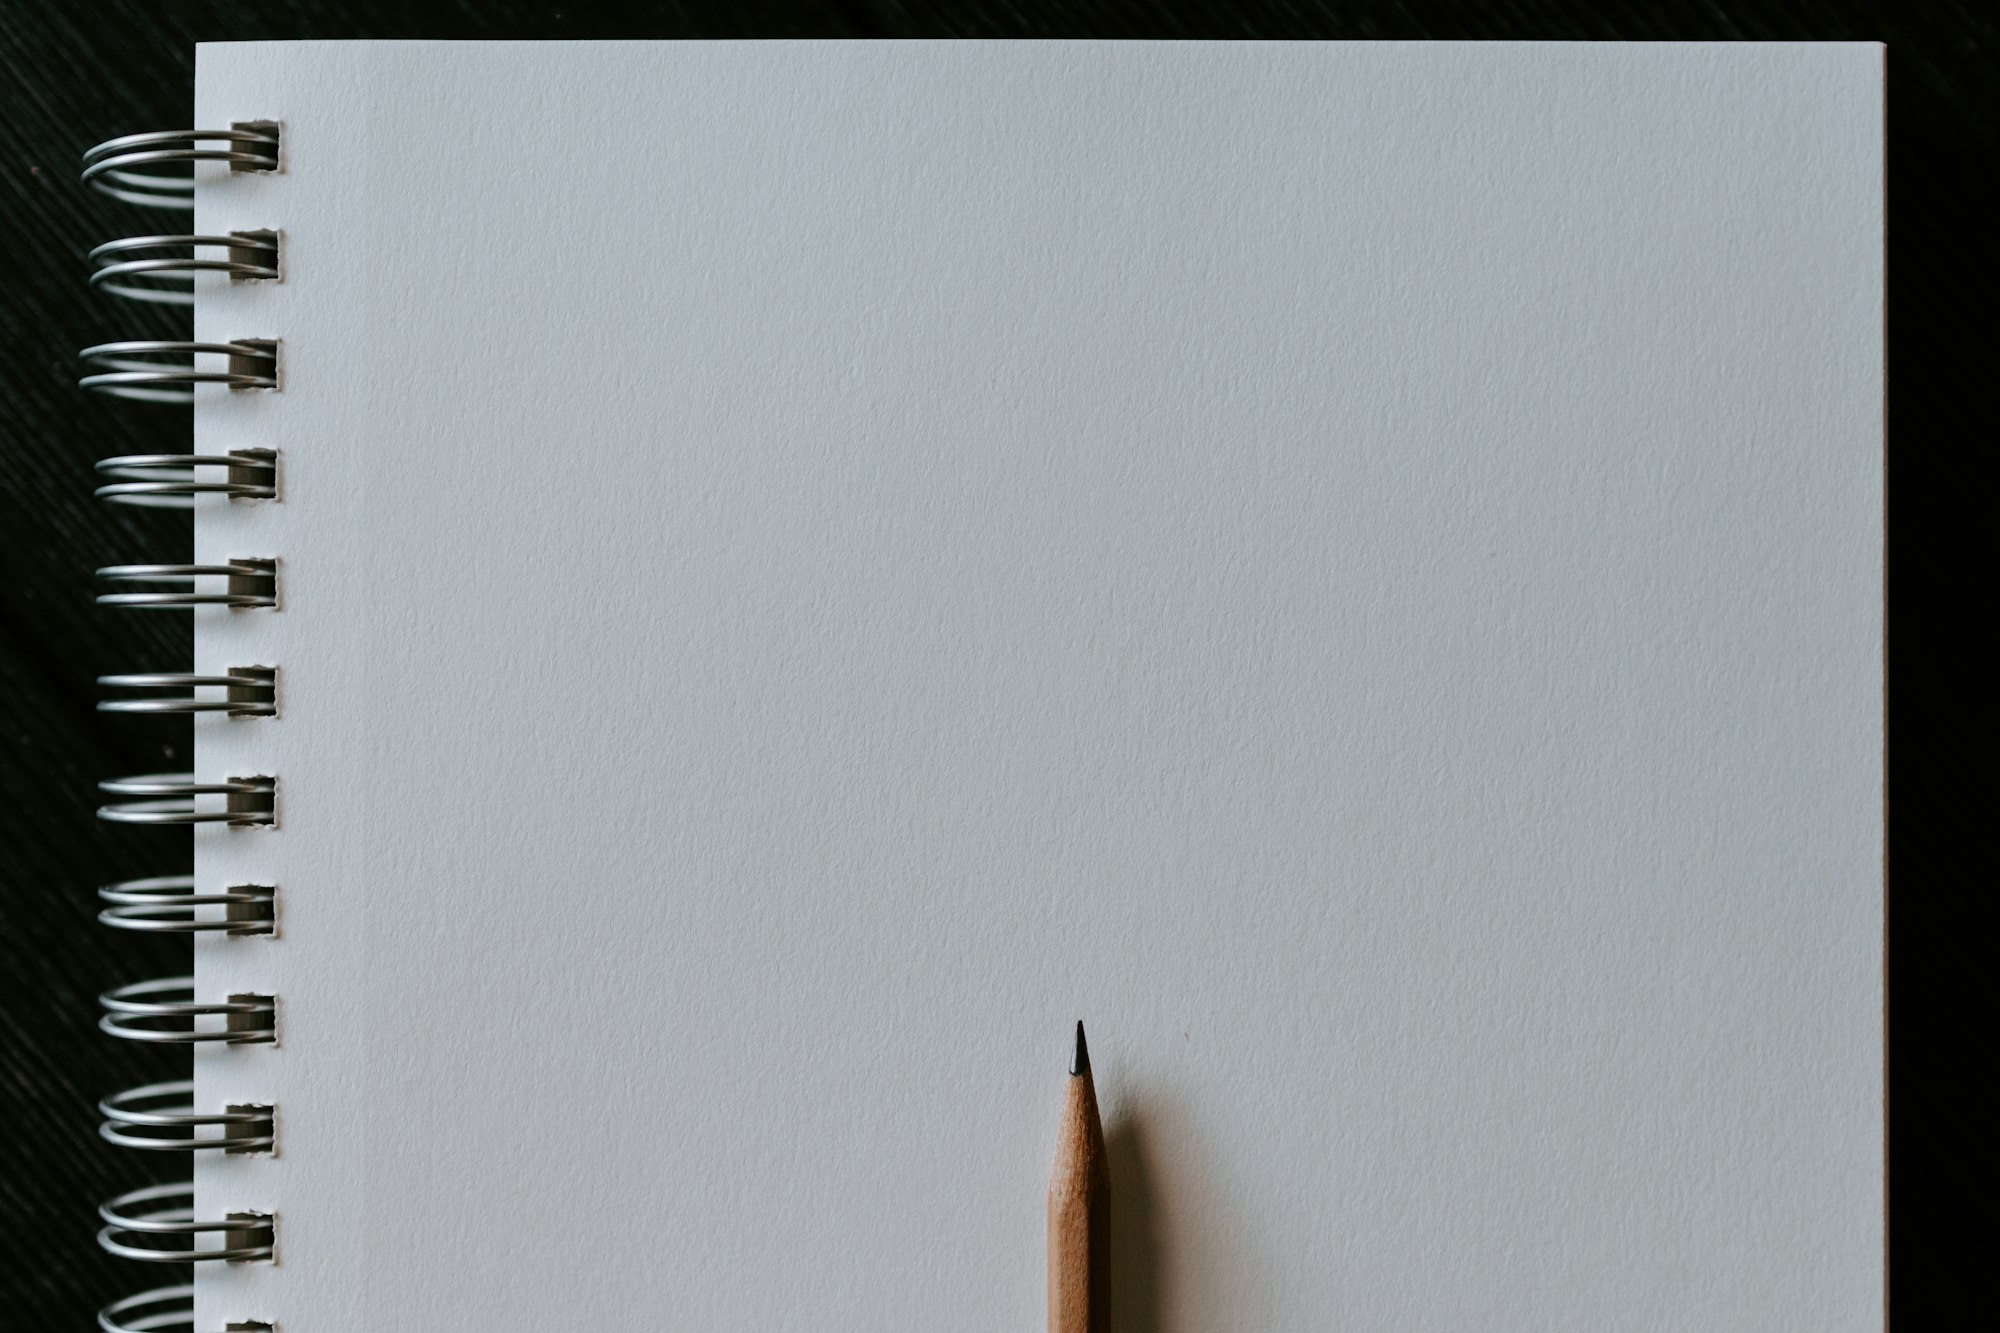 Learning to draw